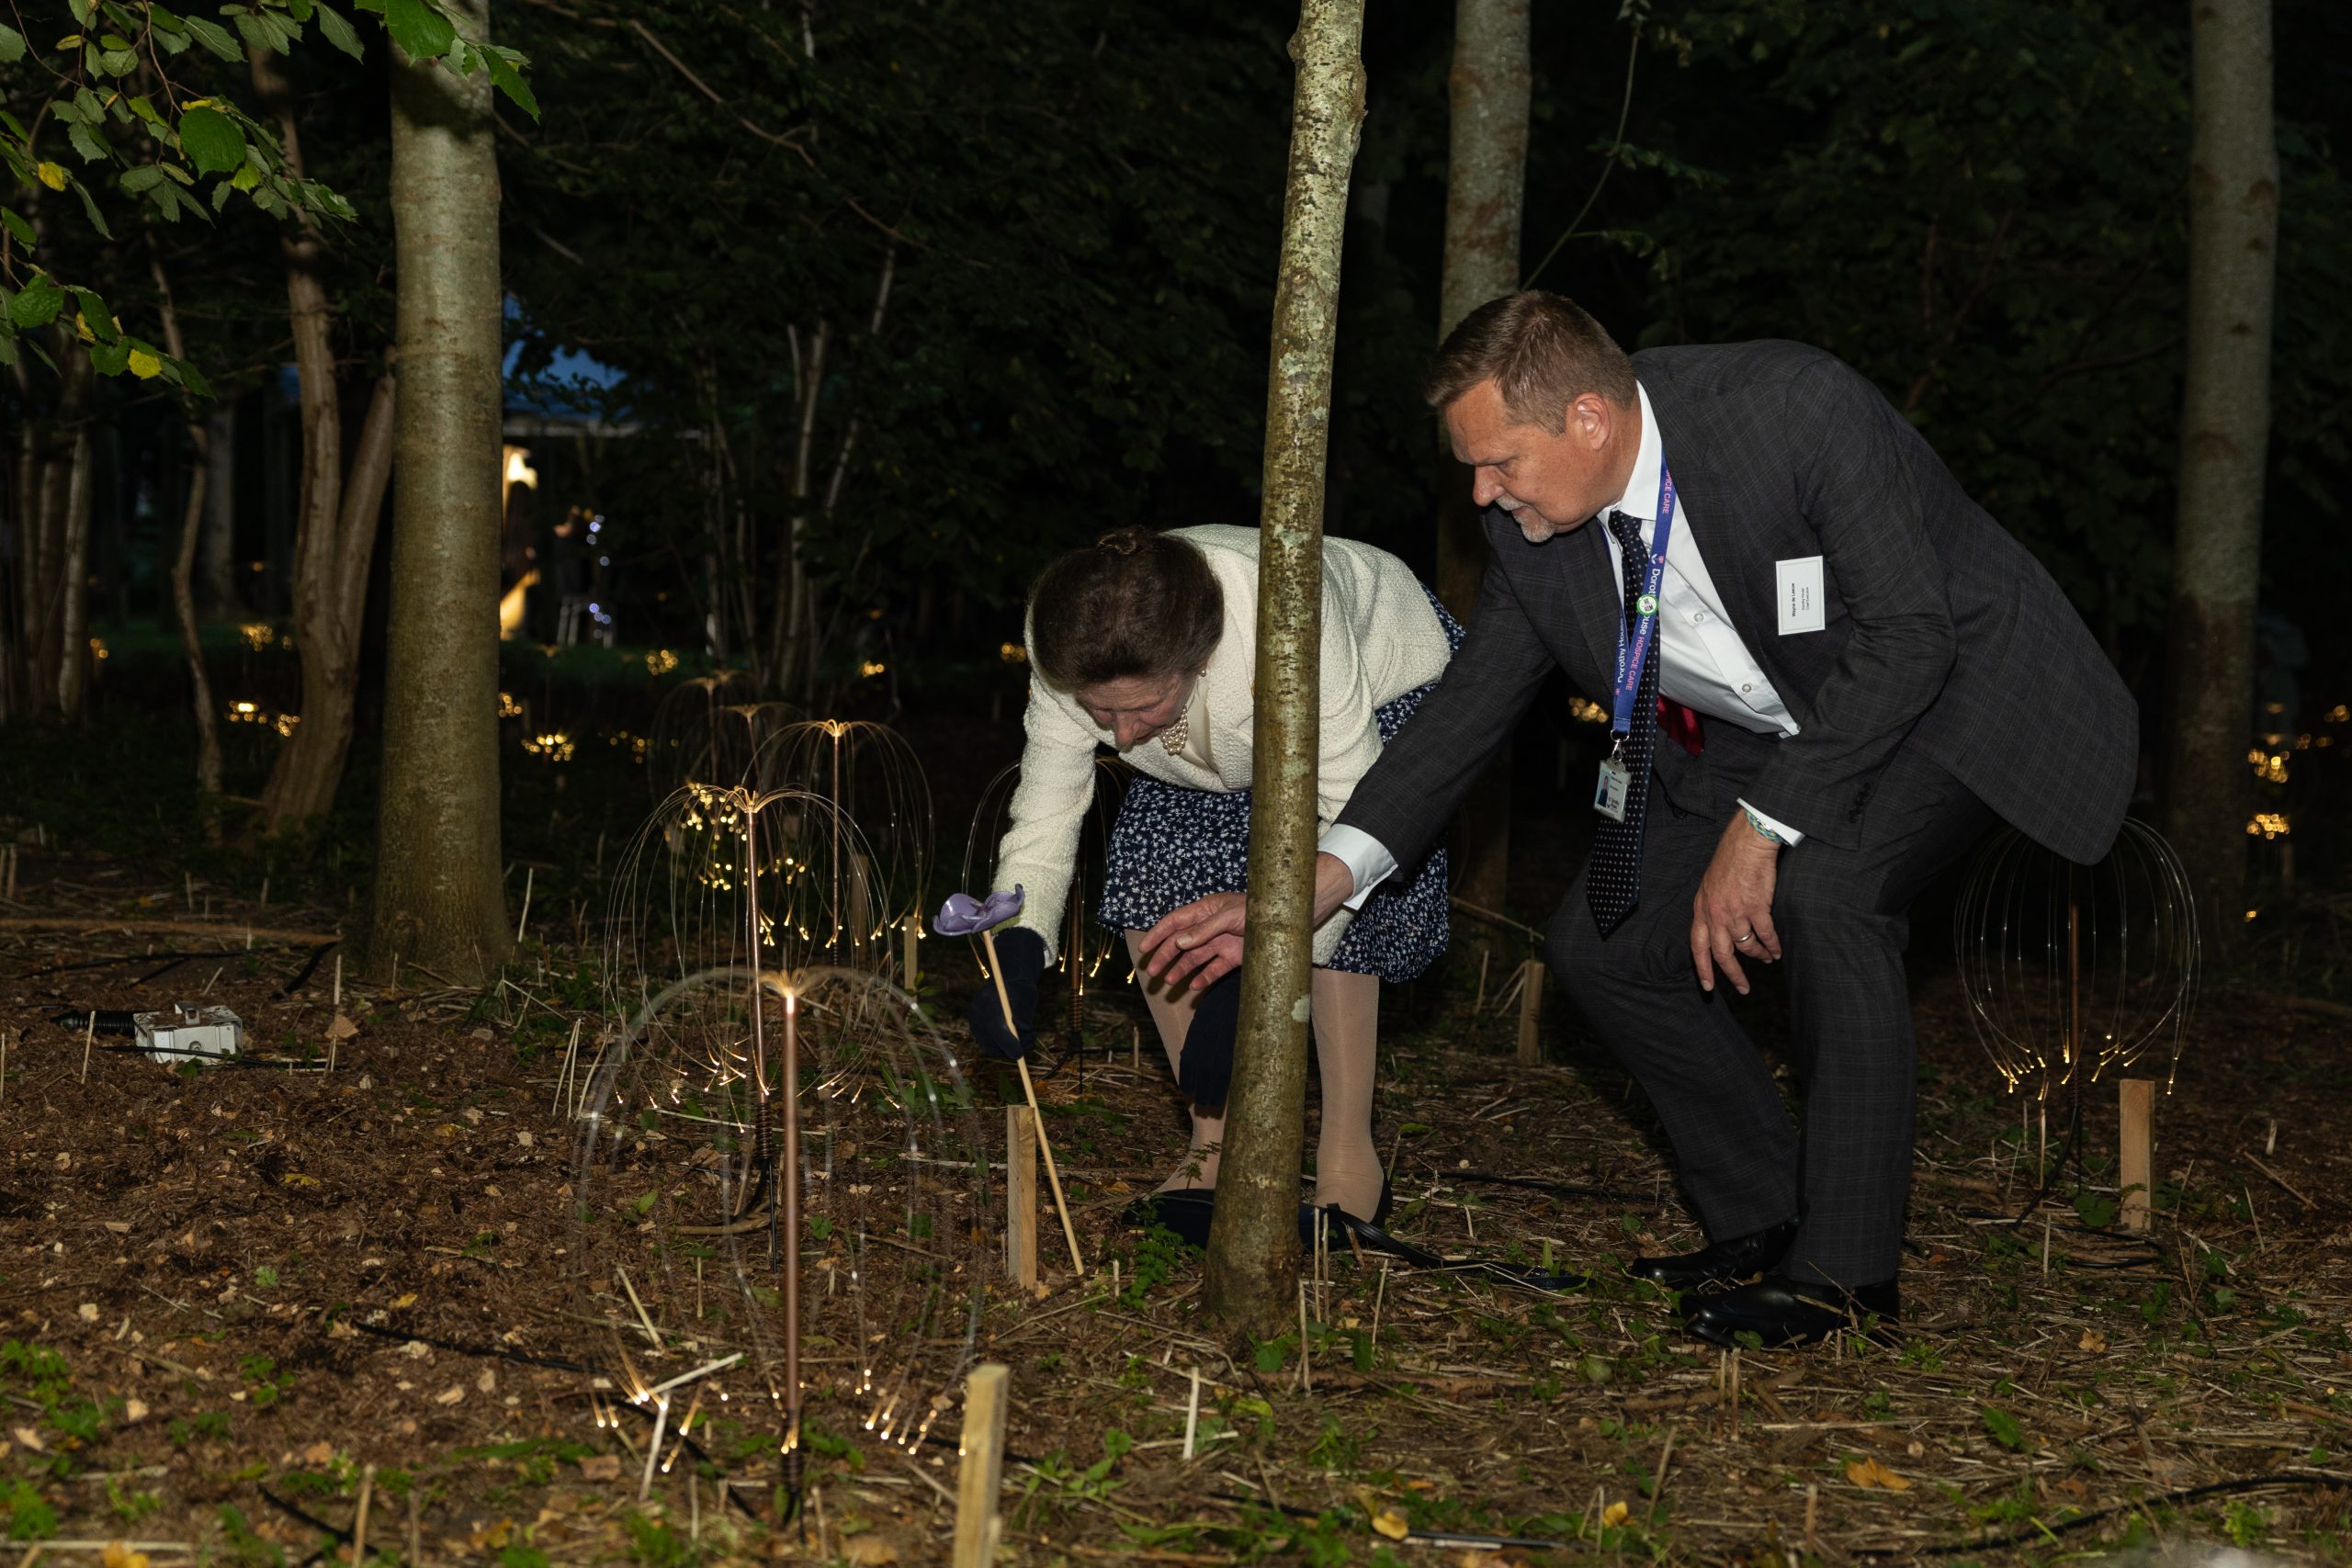 Princess Royal visiting Firefly dedicated to memory of her late mother and father, Her Majesty Queen Elizabeth II and His Royal Highness The Duke of Edinburgh.